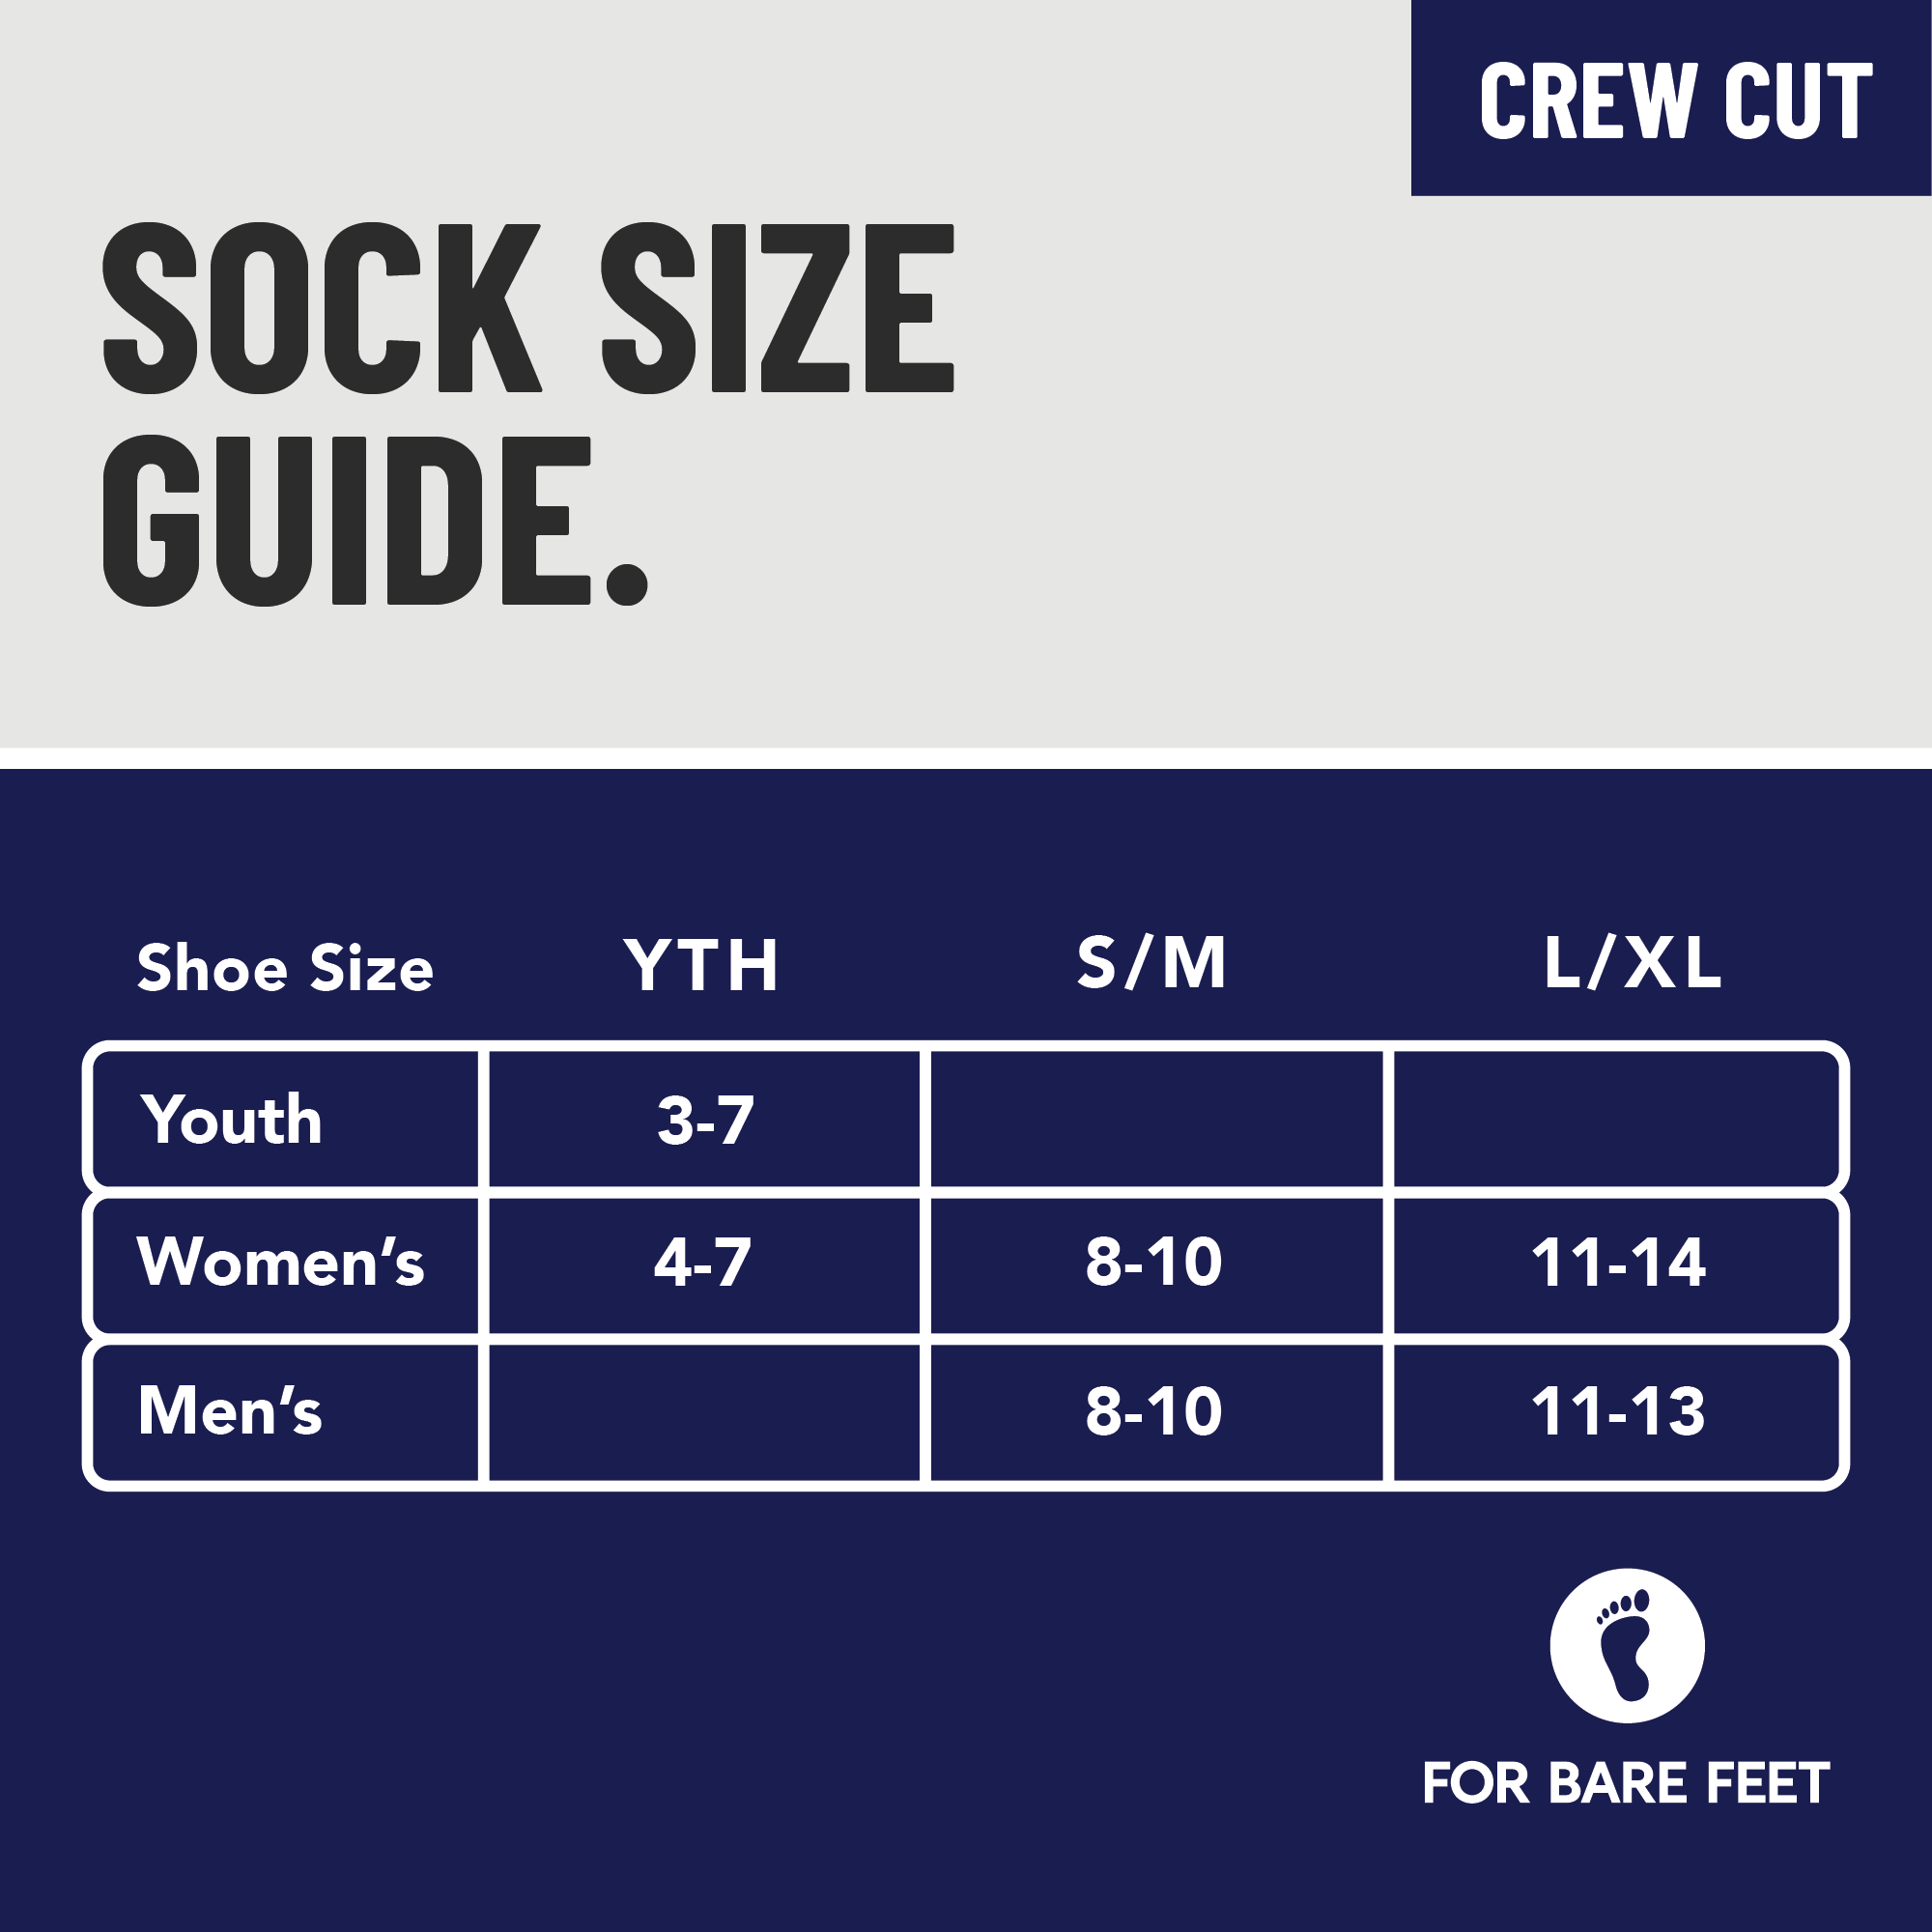 Stance / San Diego Padres 2022 City Connect Over the Calf Socks